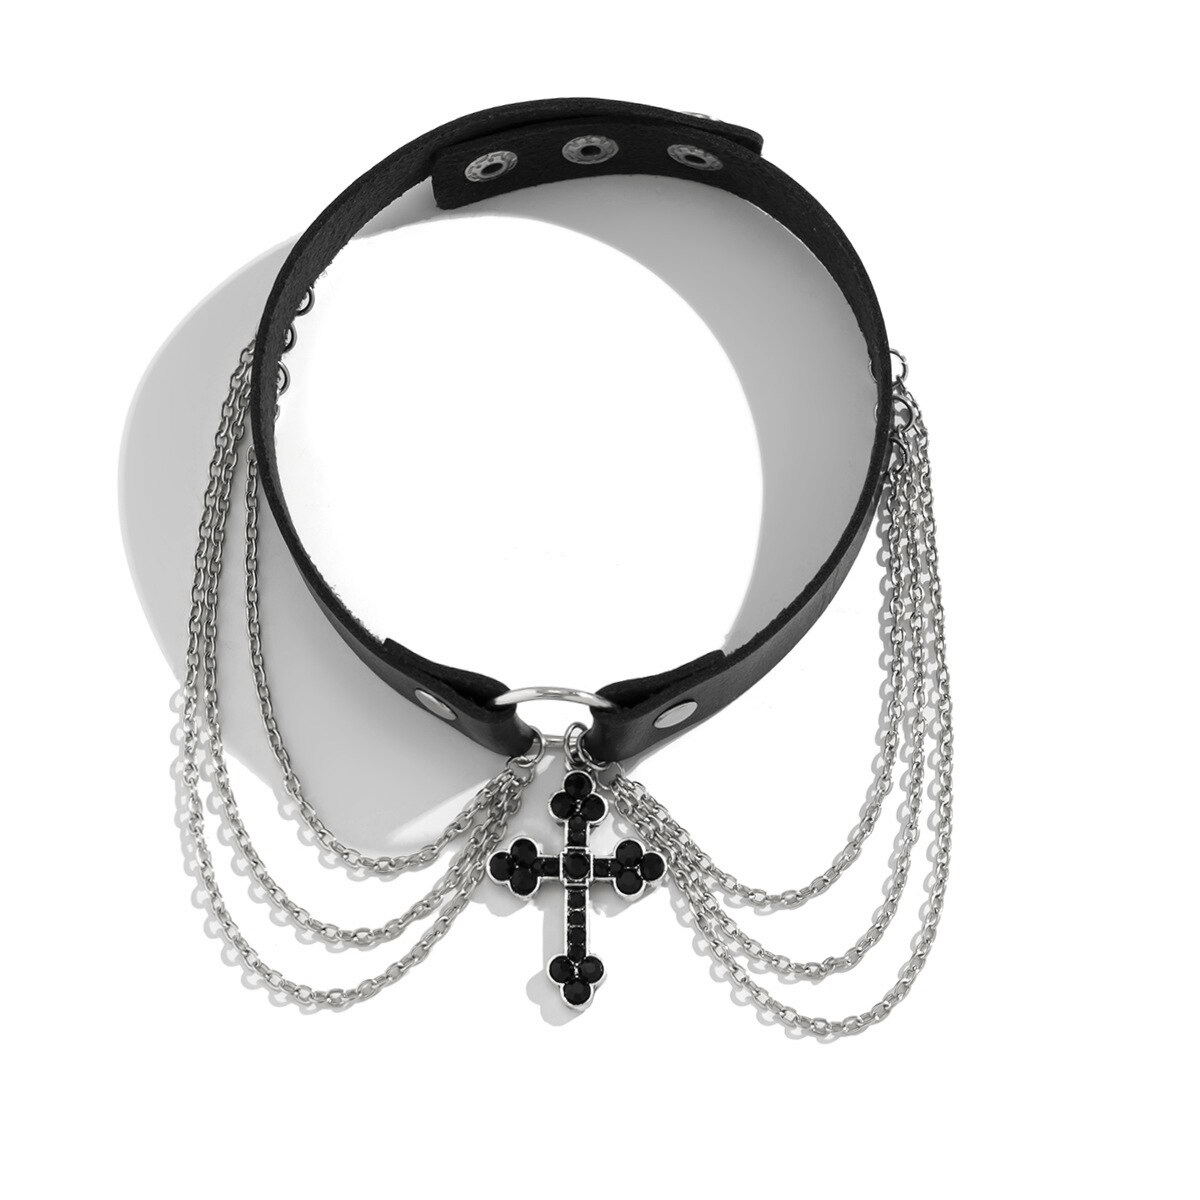 Gothic Pu Leather Black Cross Necklace / Punk Grunge Accessories for Women - HARD'N'HEAVY